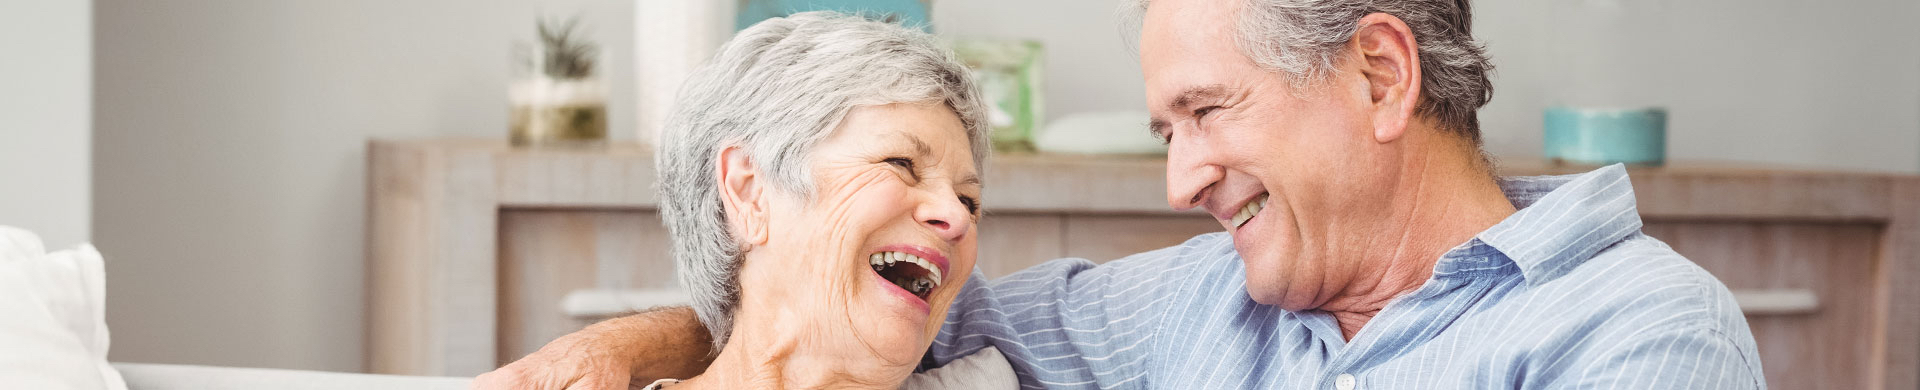 A senior man and woman smile and laugh 